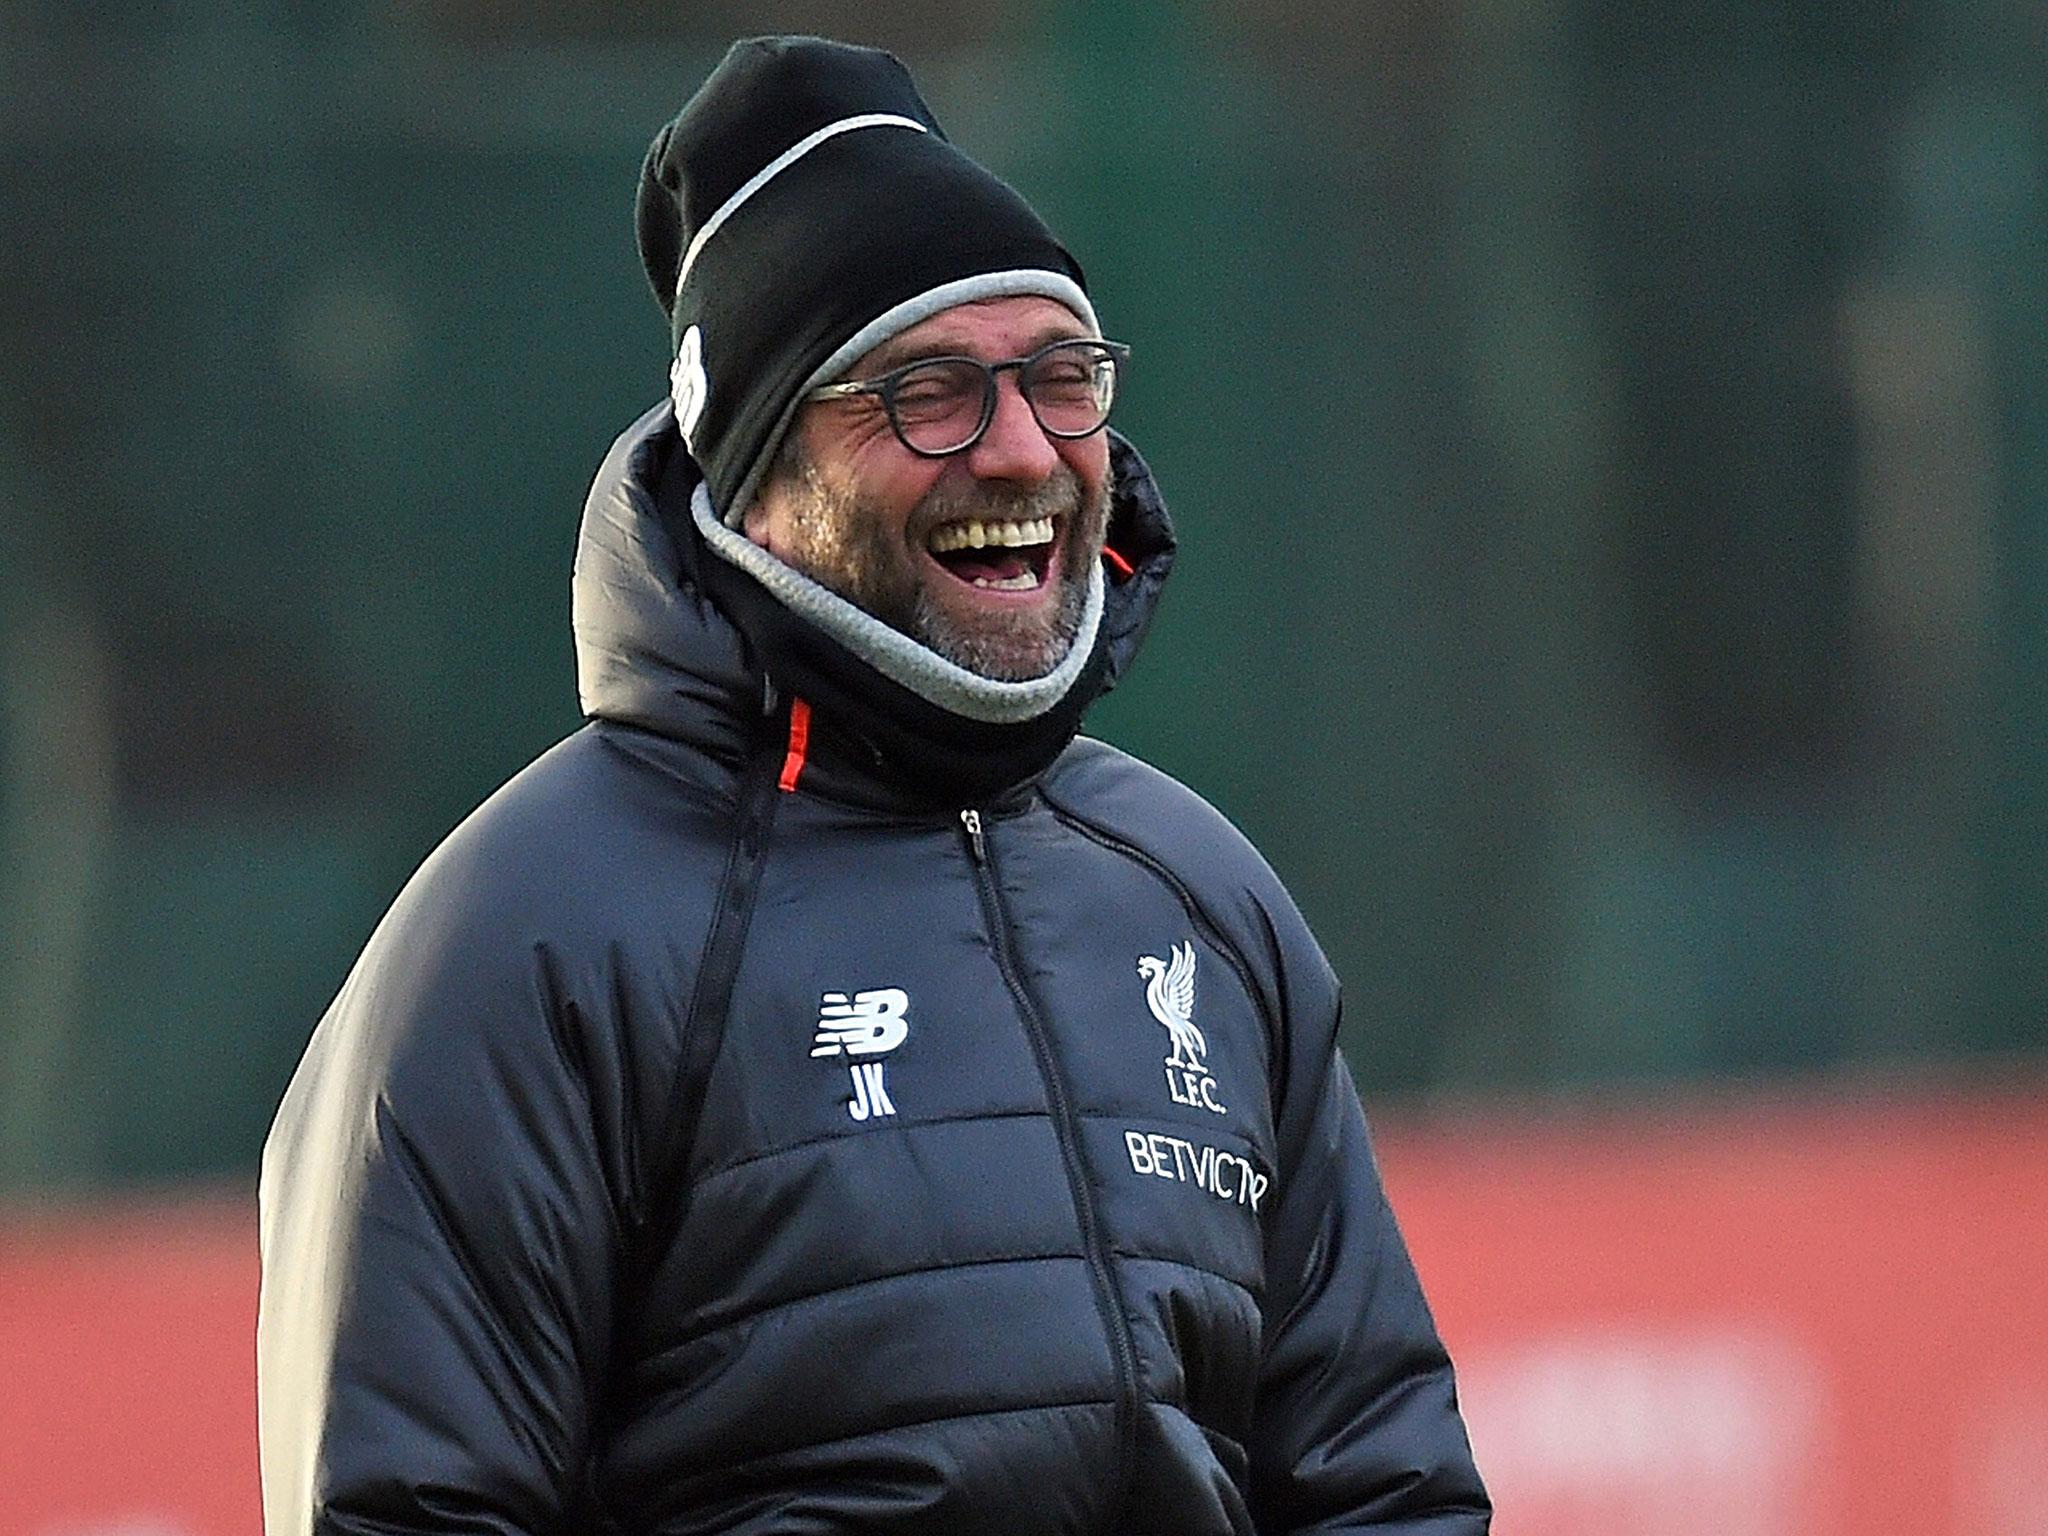 Jurgen Klopp will not sign anyone for Liverpool who puts money before their development